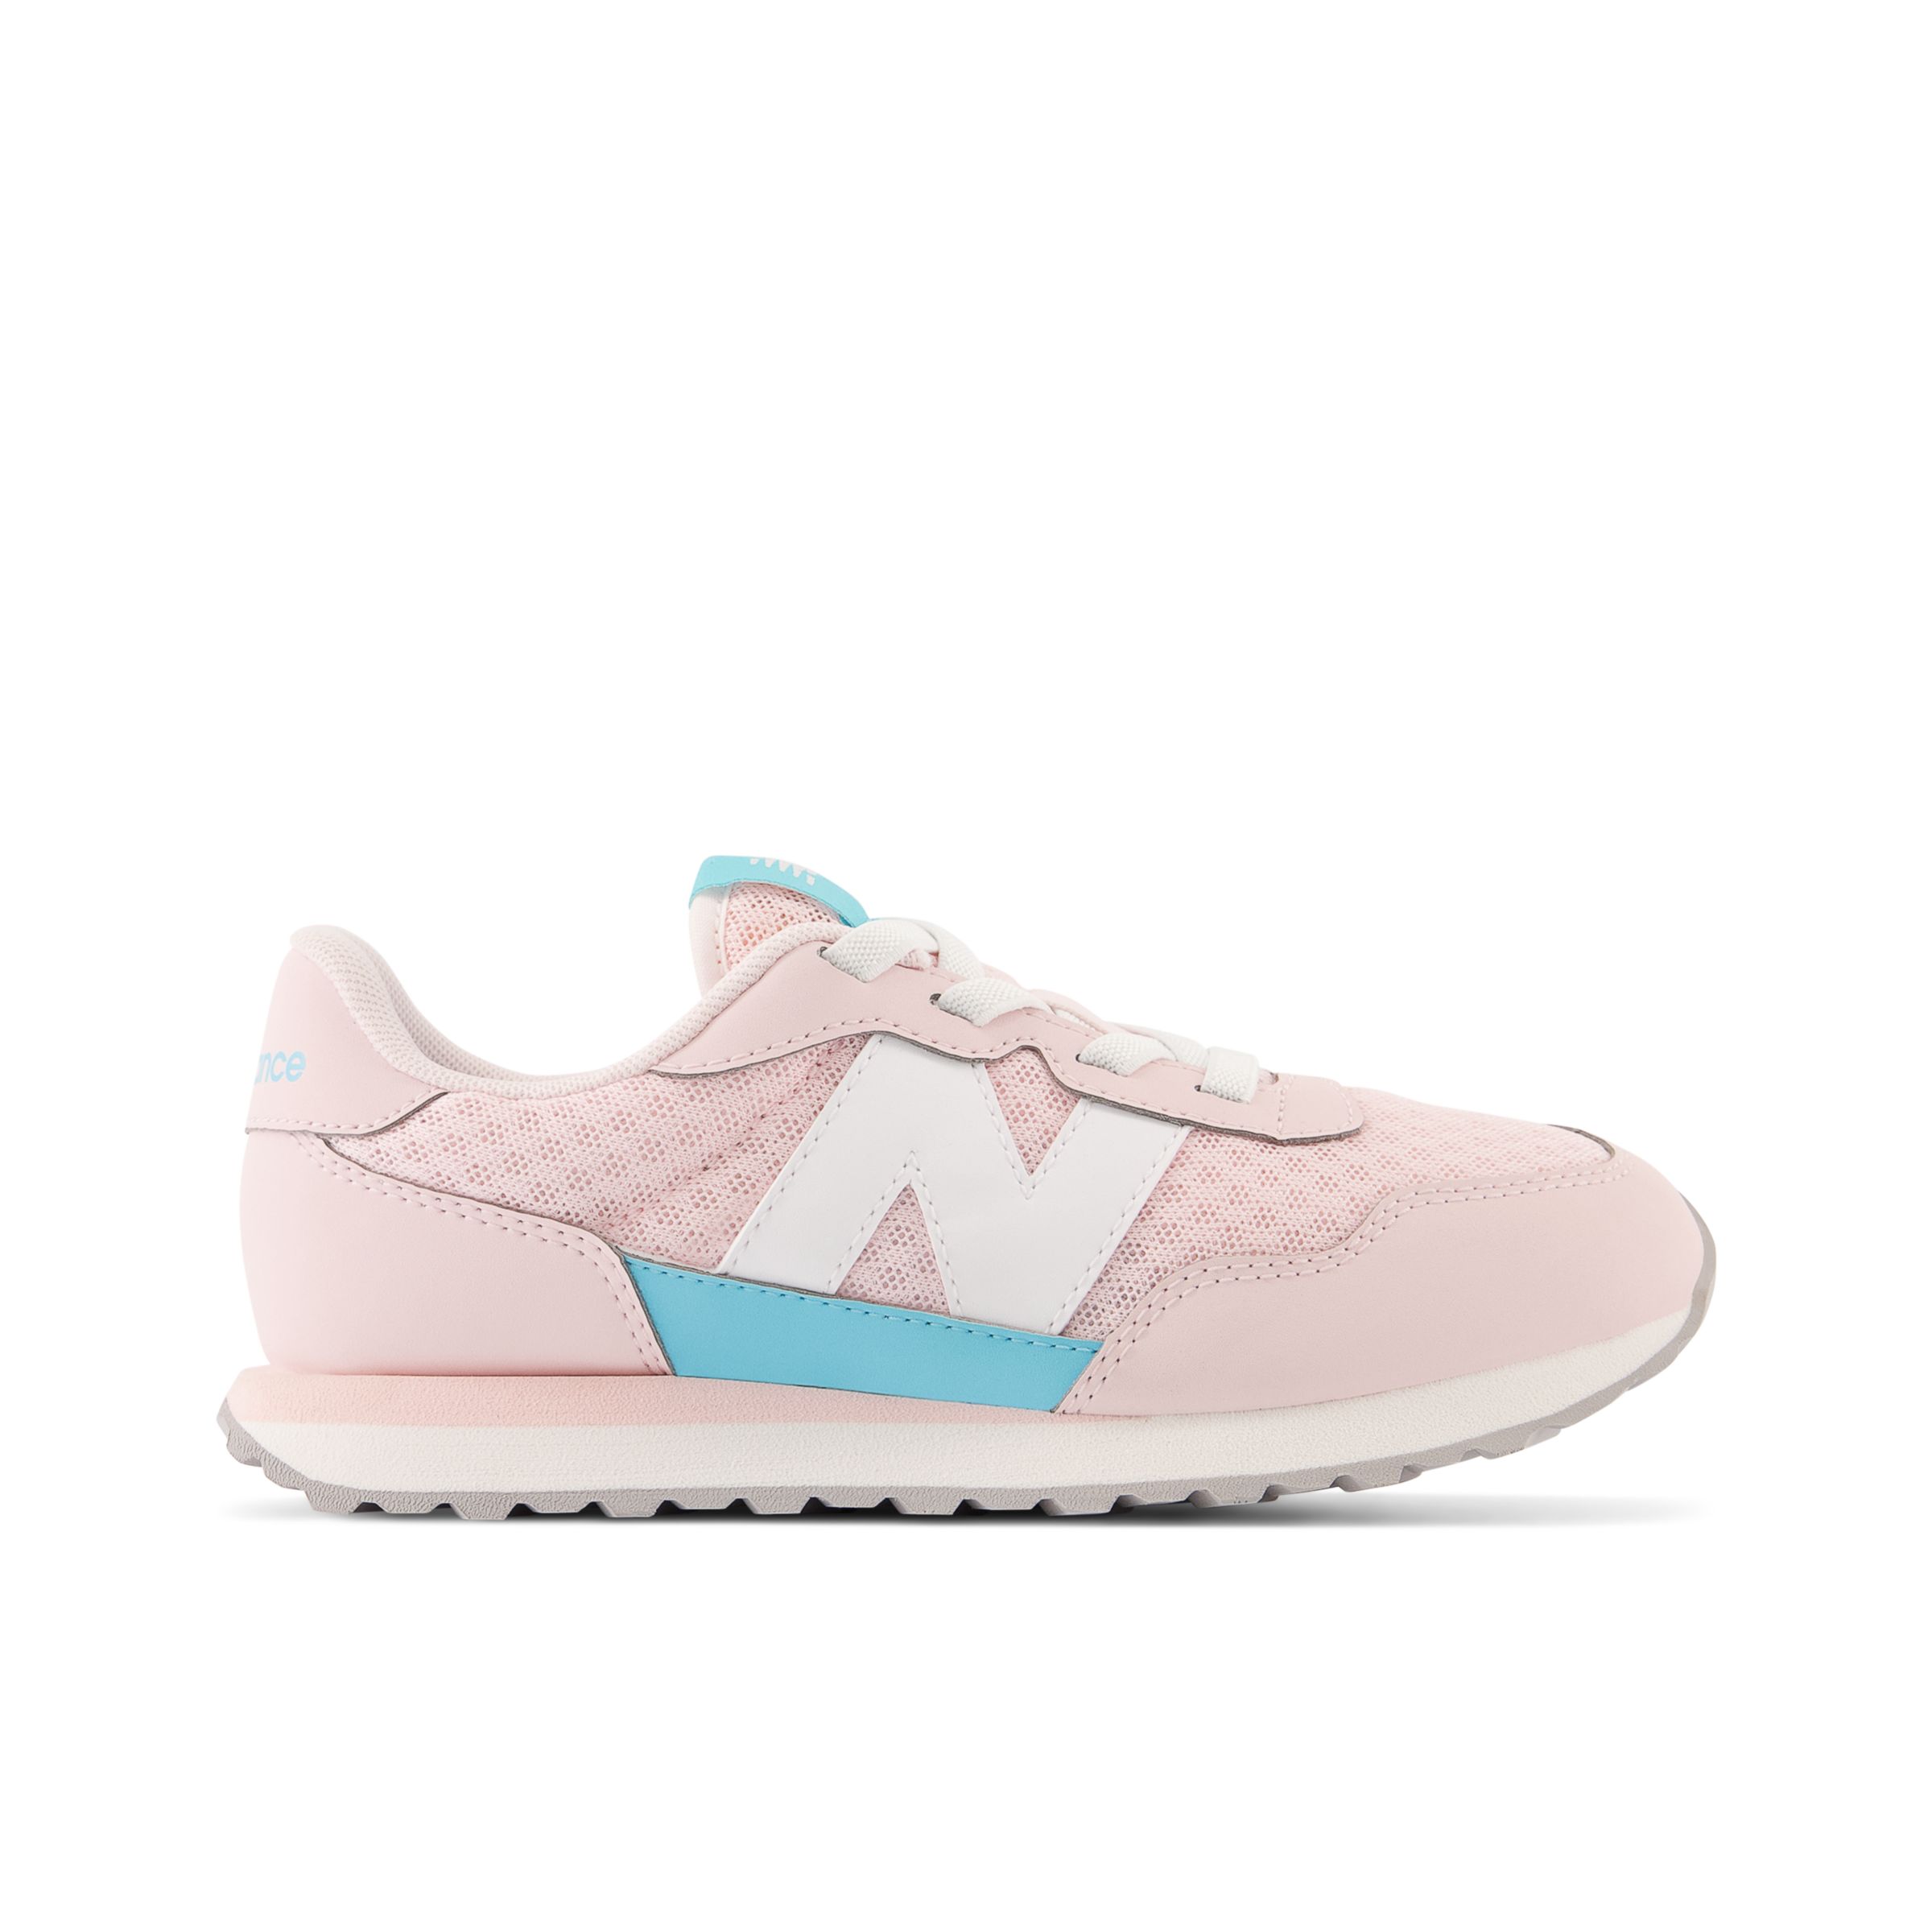 New Balance Enfant 237 Bungee Lace en Rose/Blanc, Synthetic, Taille 35